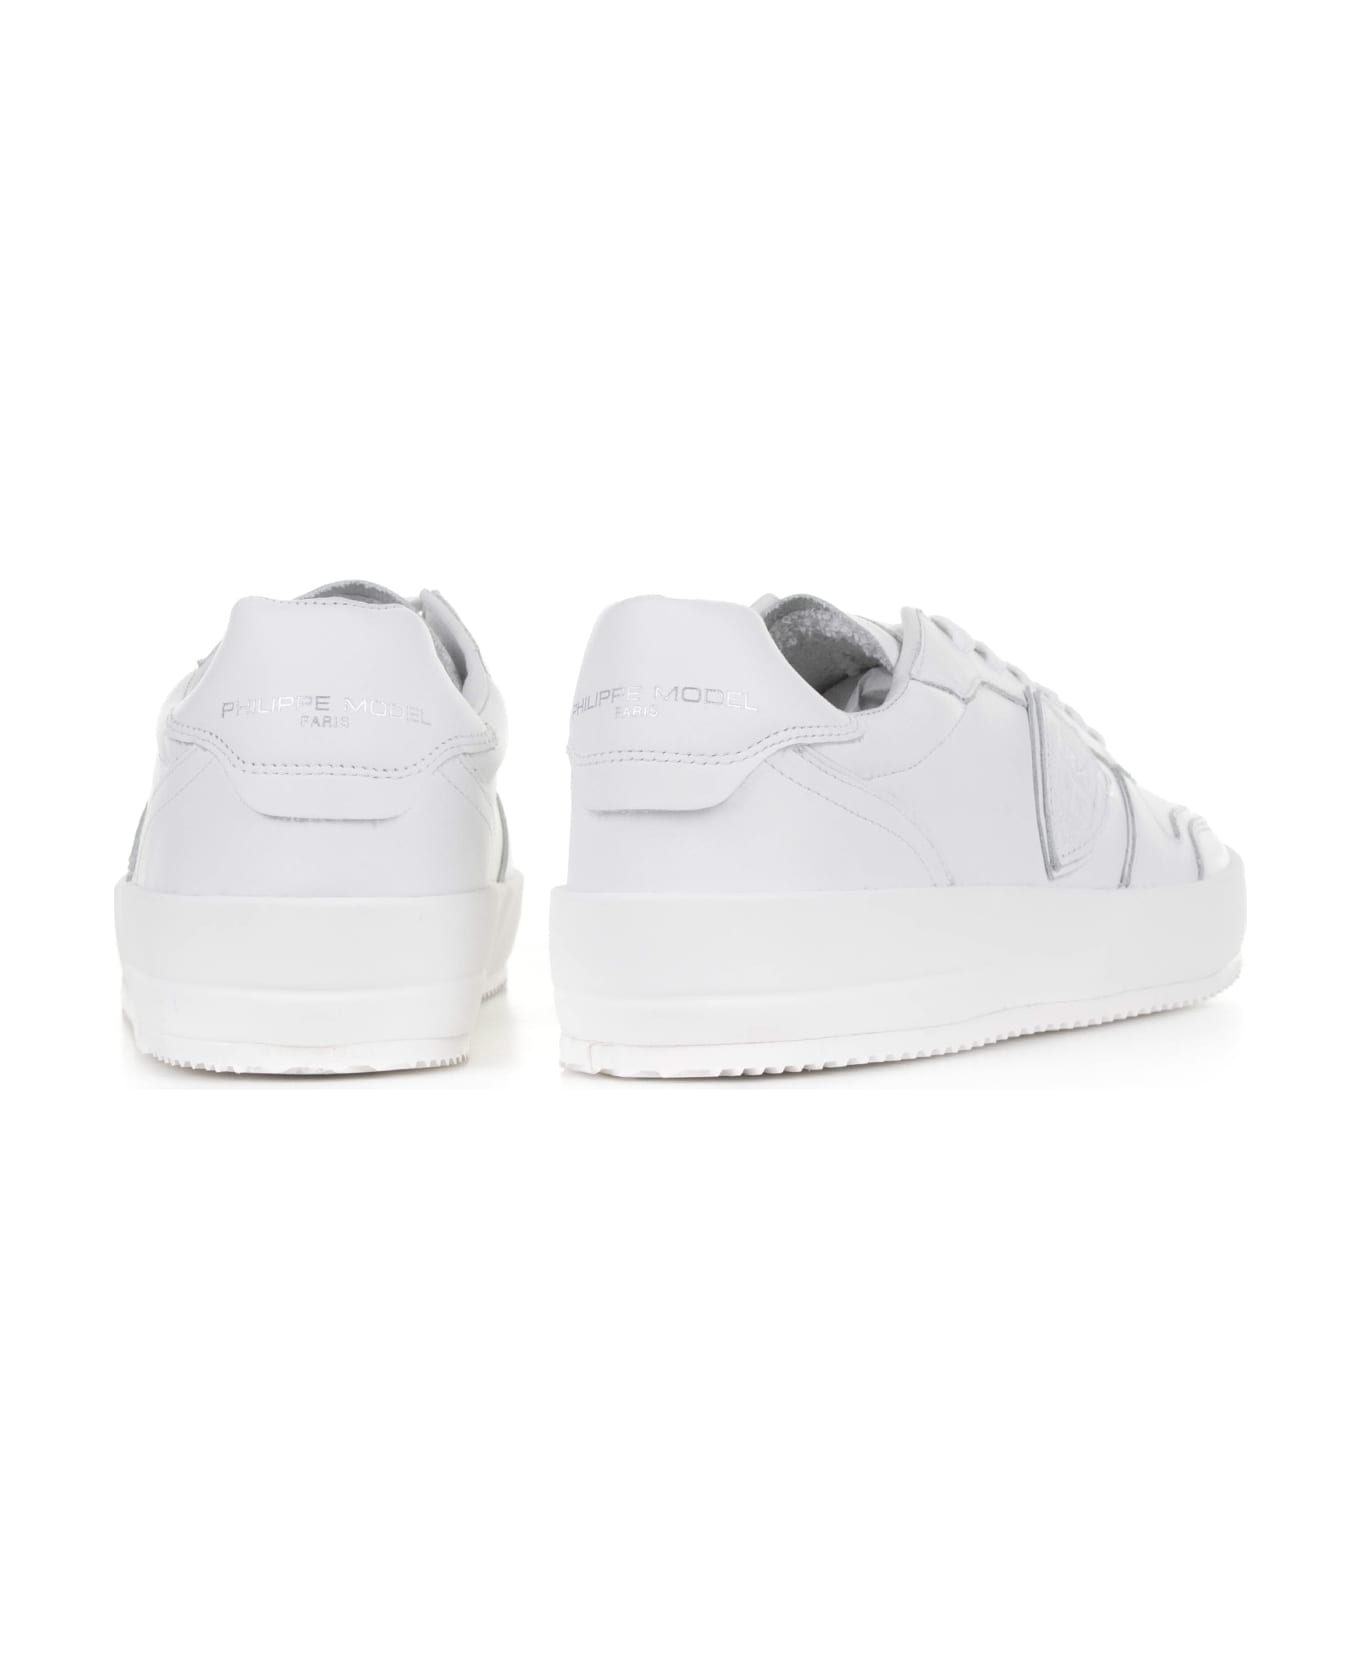 Philippe Model Nice White Low Sneakers For Men - BLANC